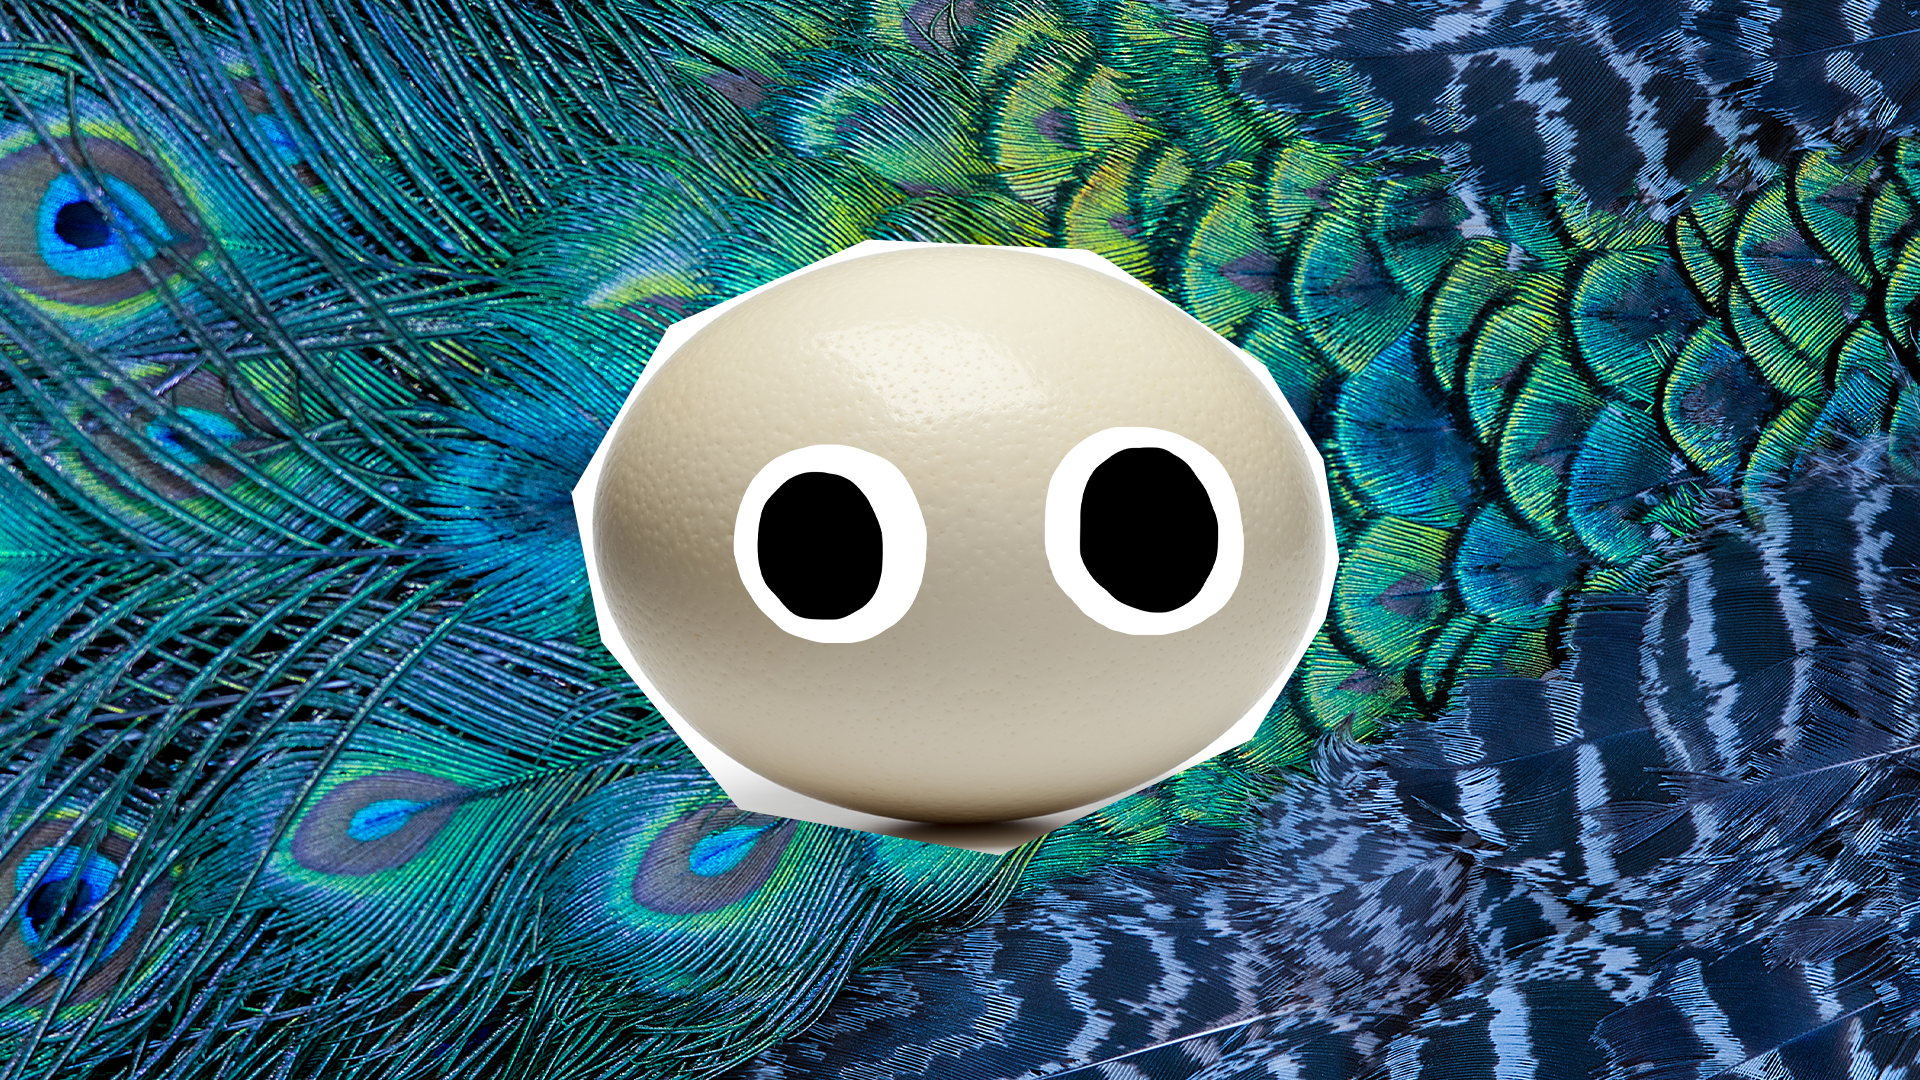 Egg with eyes on feather background